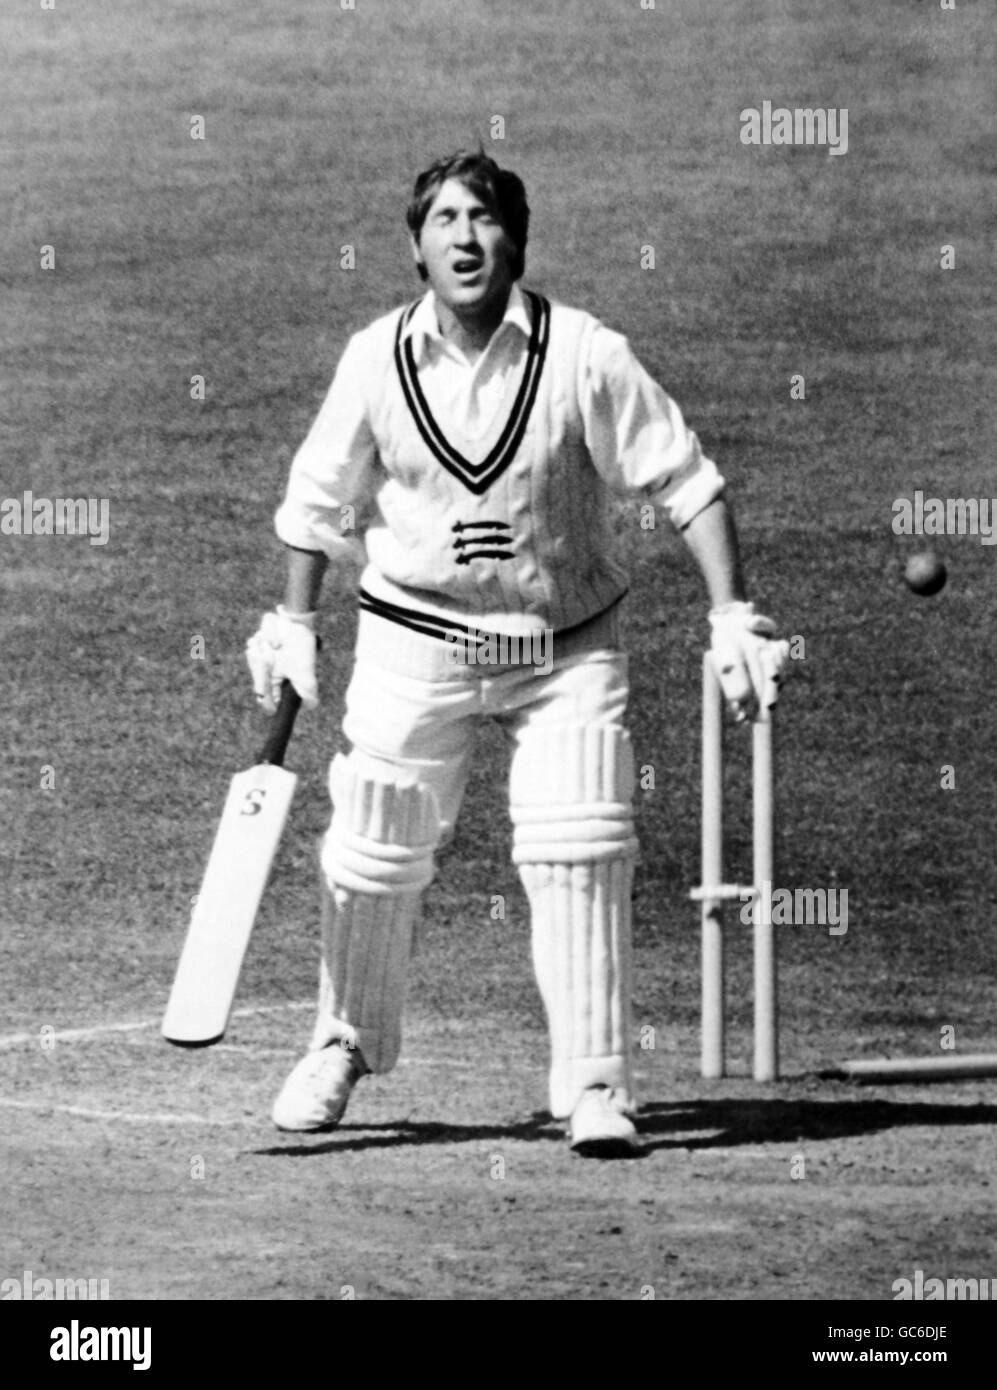 Cricket - India in England 1971 - Middlesex v Indians - Lord's. P.H.Parfitt is out bowled by R.A.Woolmer. Stock Photo